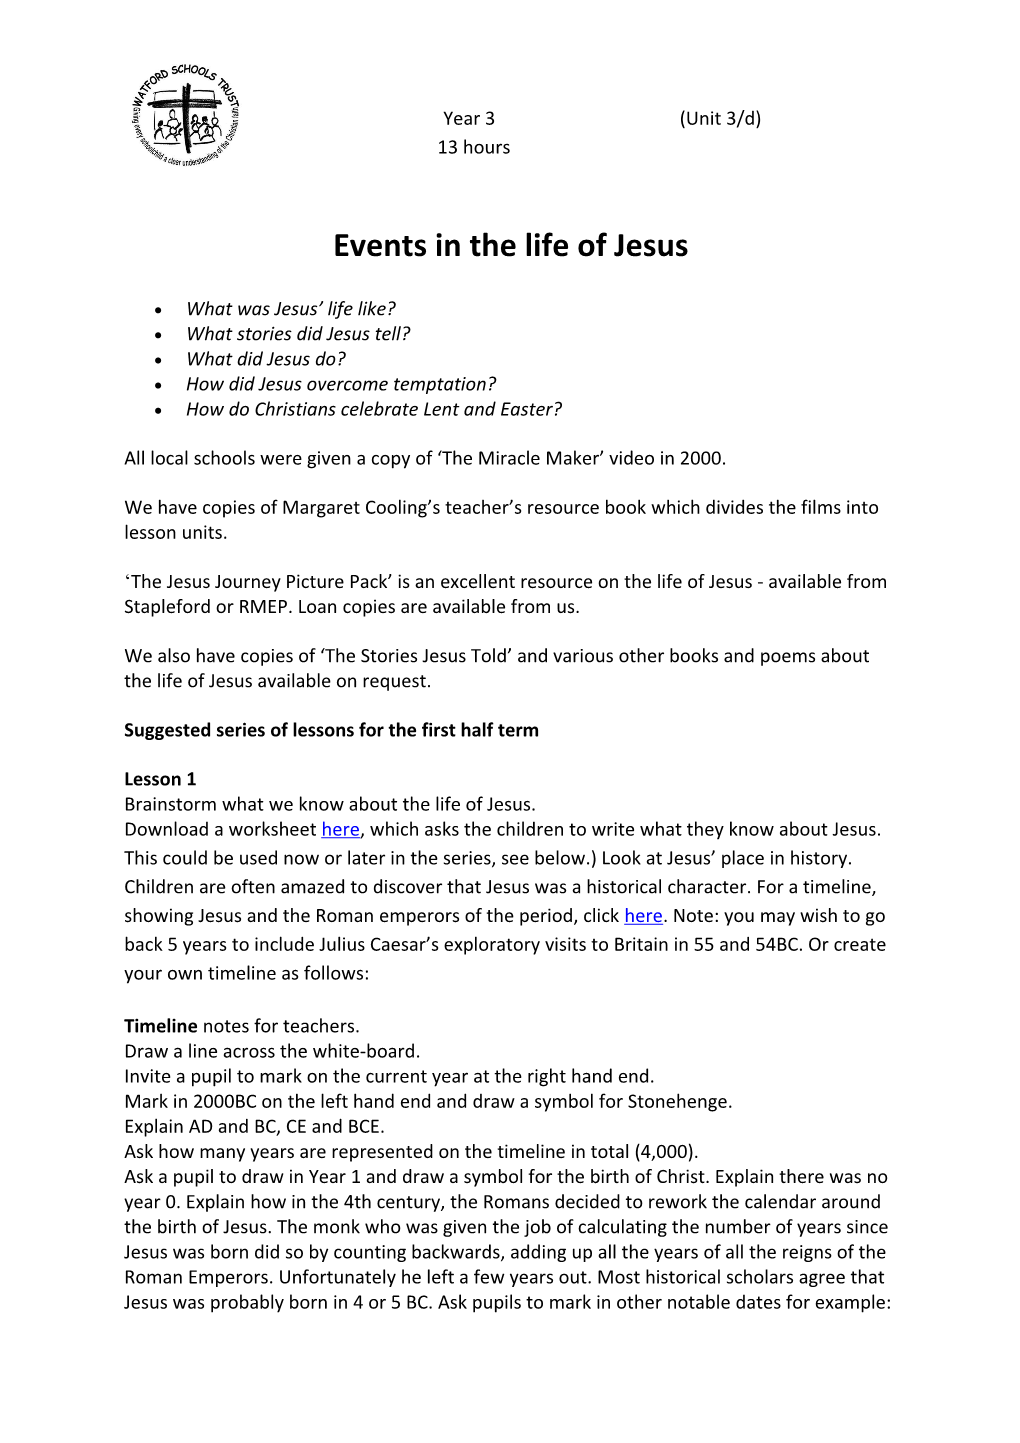 Events in the Life of Jesus